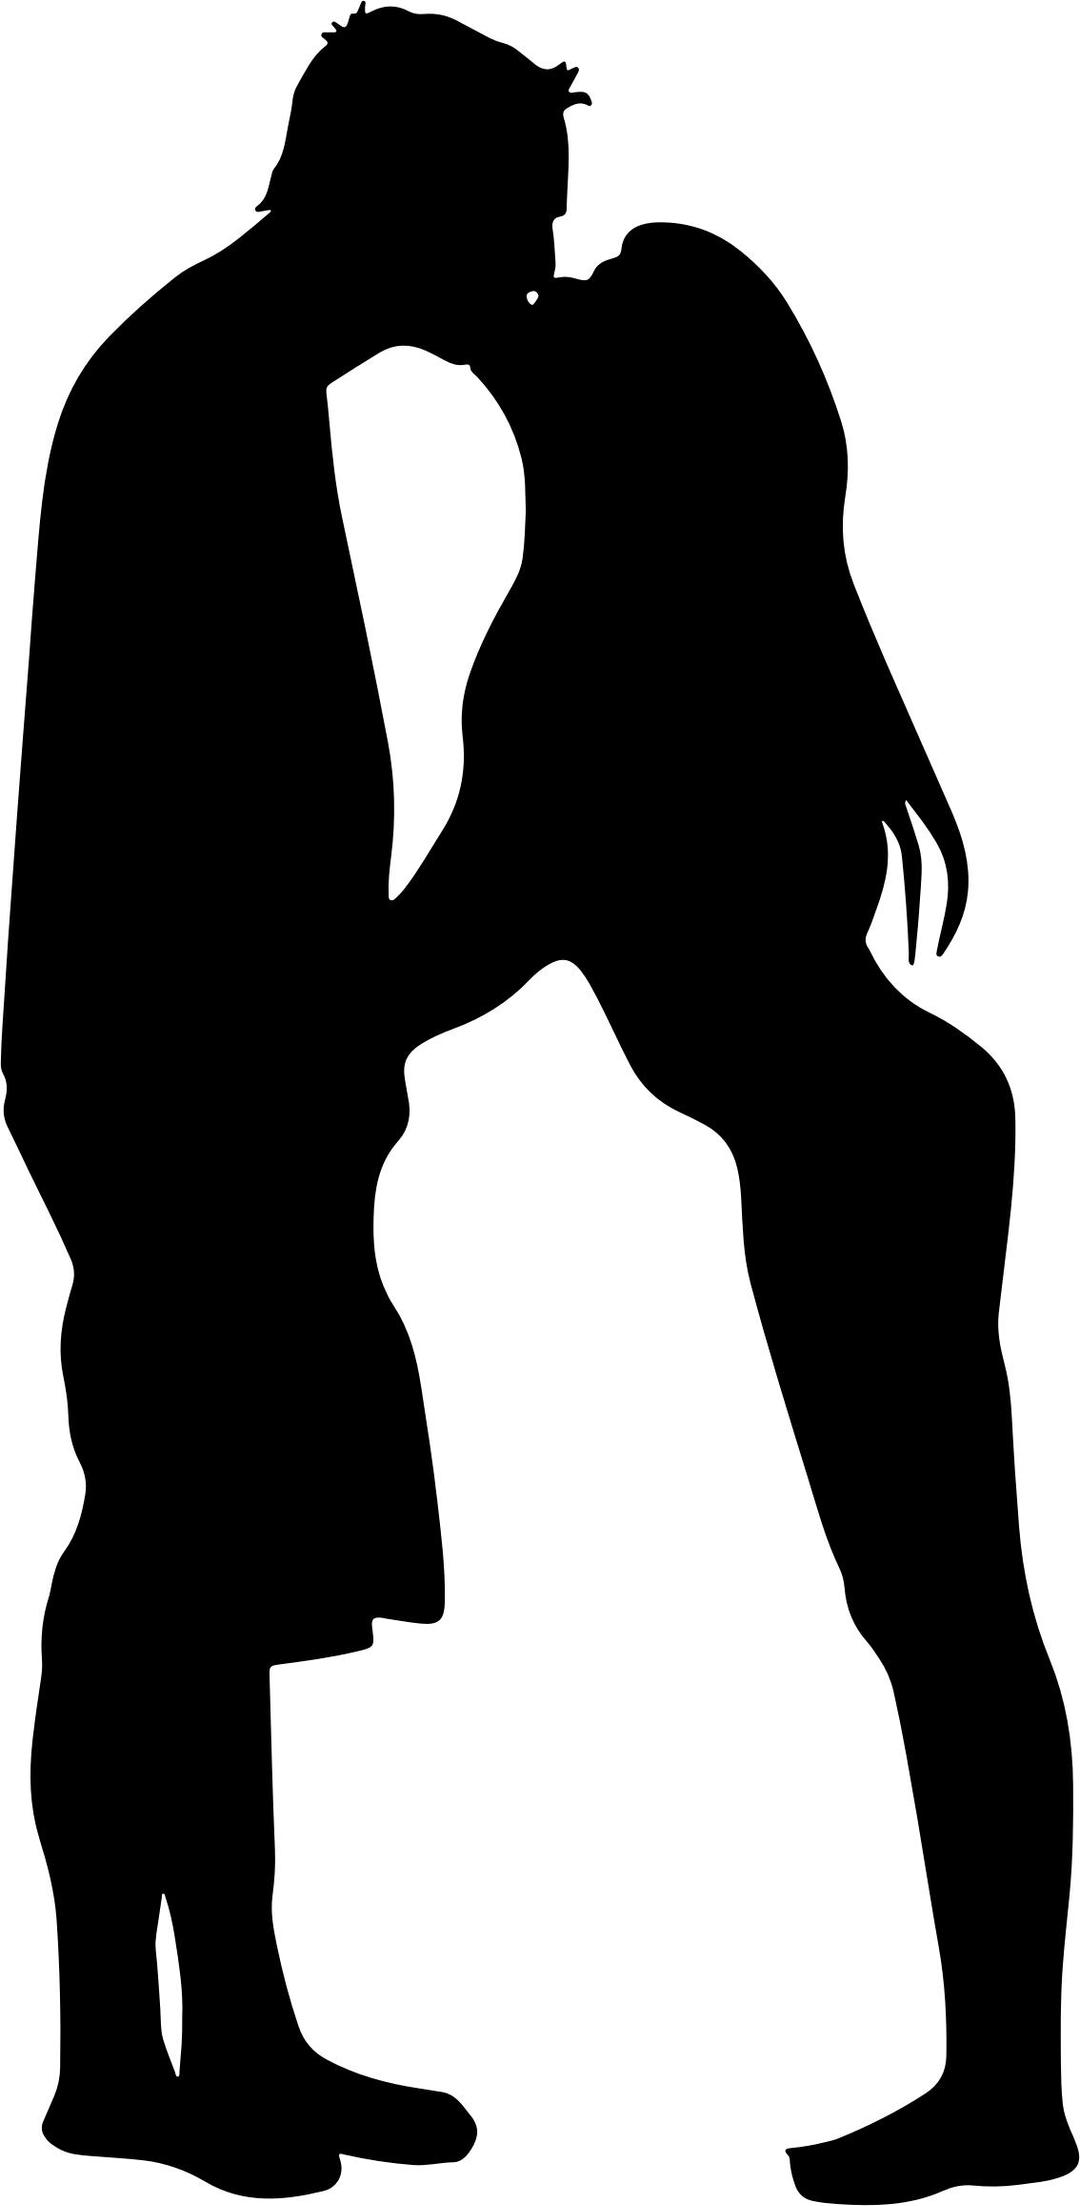 Couple Kissing Silhouette png transparent